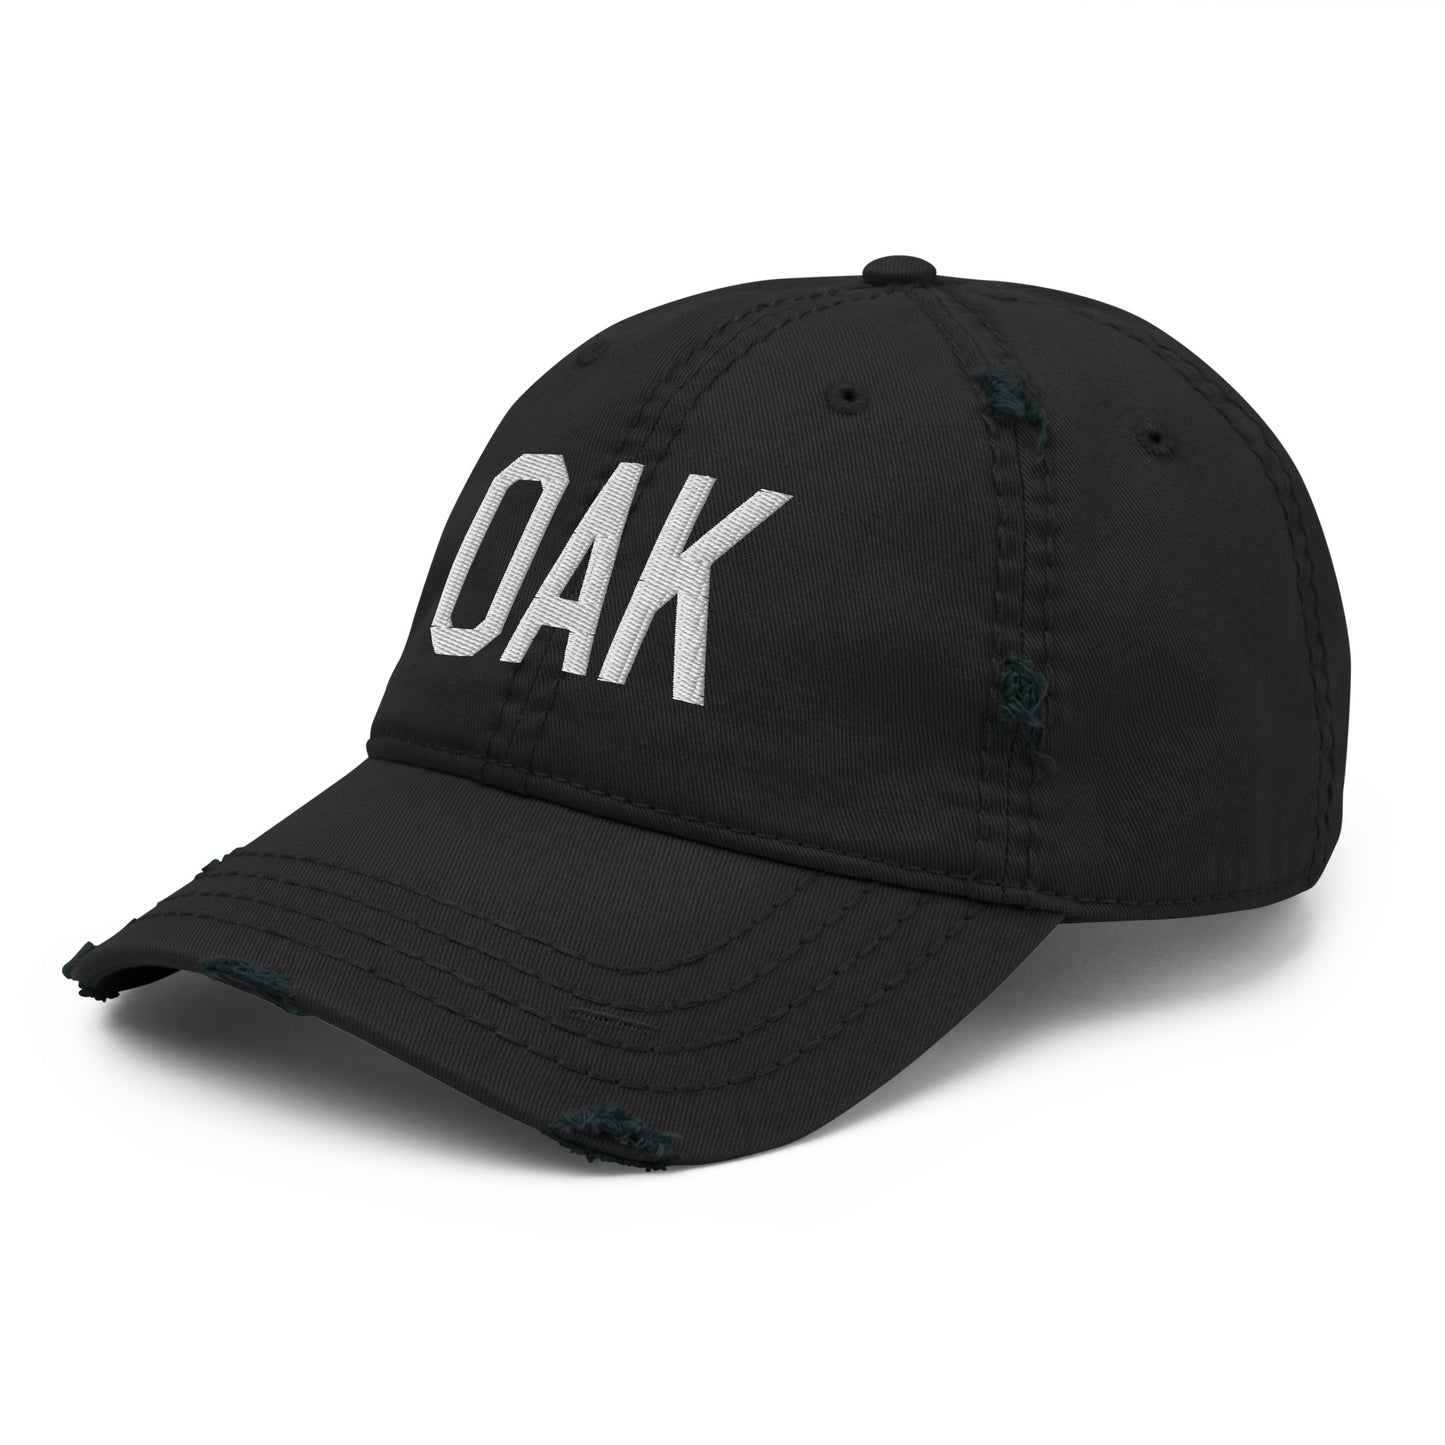 Airport Code Distressed Hat - White • OAK Oakland • YHM Designs - Image 11